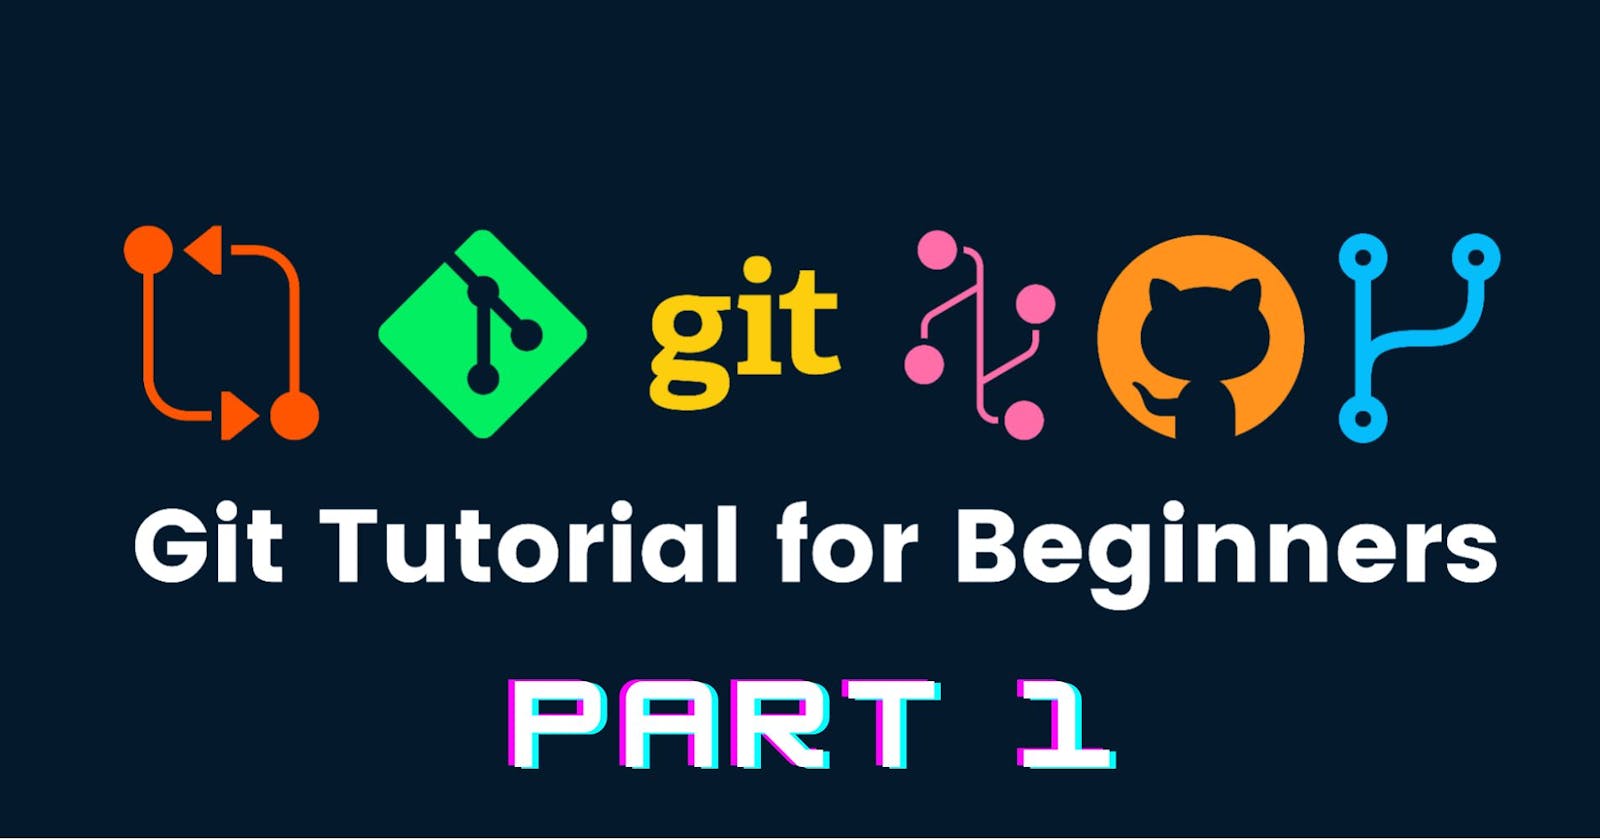 Mastering Git and Github: Essential Information (Part 1)